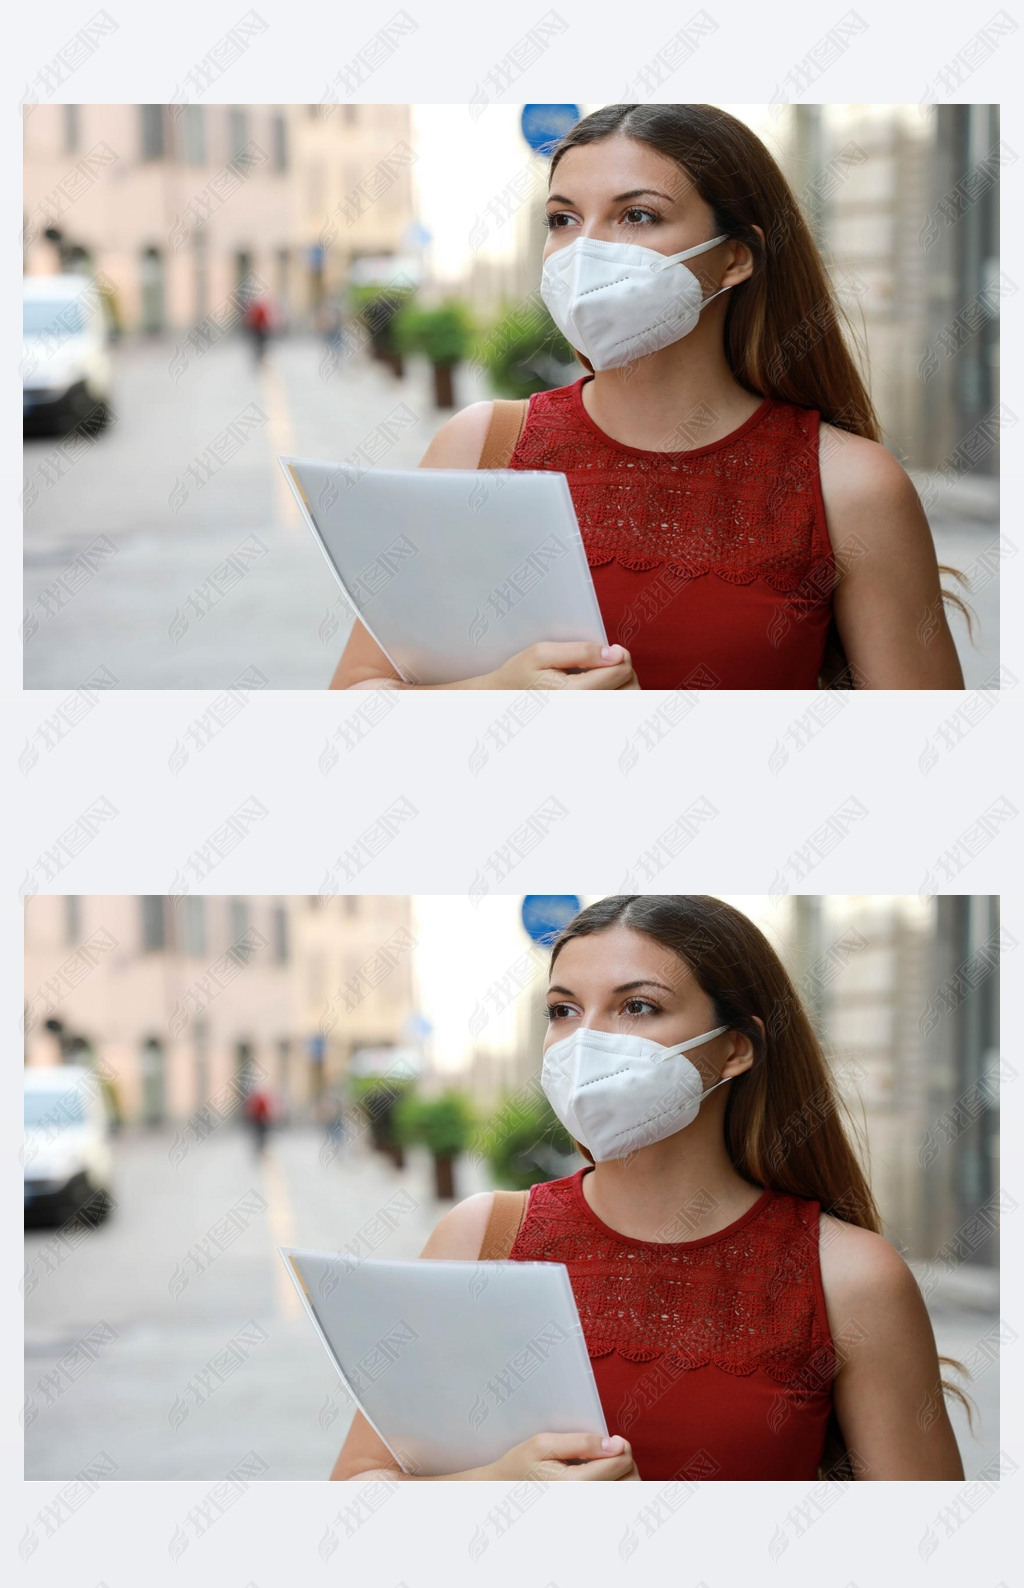 COVID-19 Global Economic Crisis Unemployed Worried Girl with KN95 FFP2 Mask looking for Job walking 